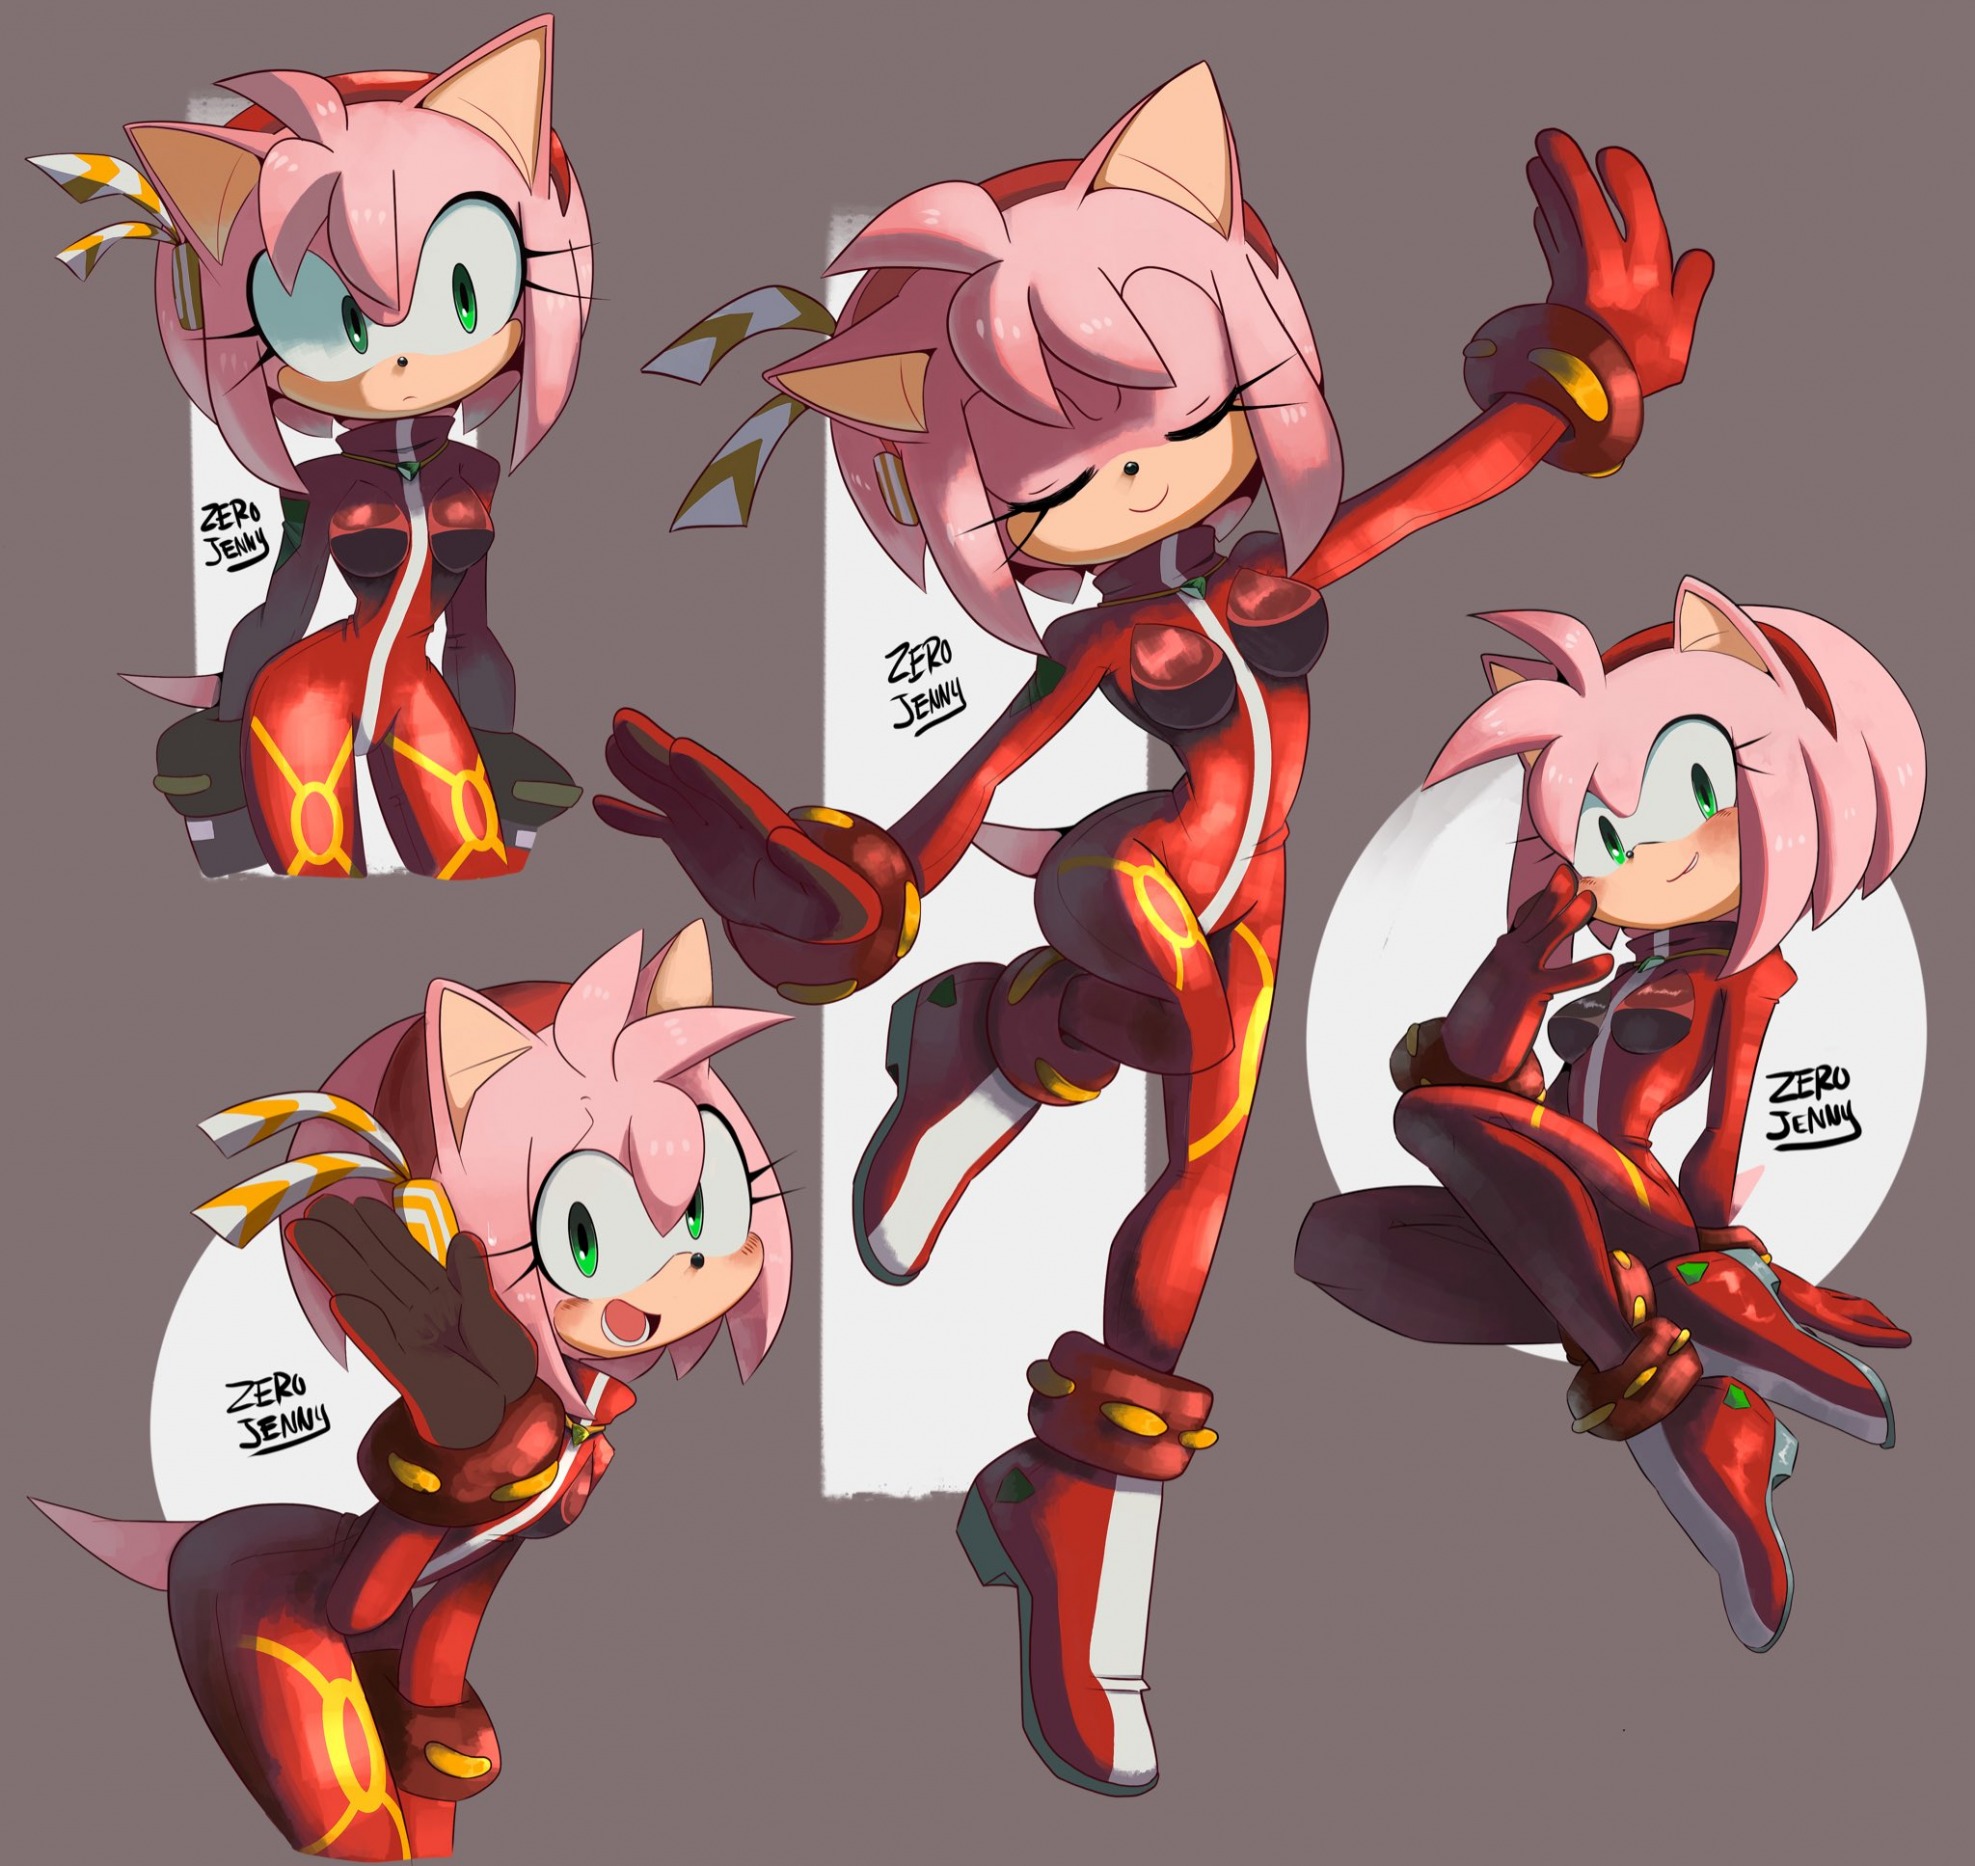 High Quality Amy Rose… Asuka style or 02 style…? Blank Meme Template